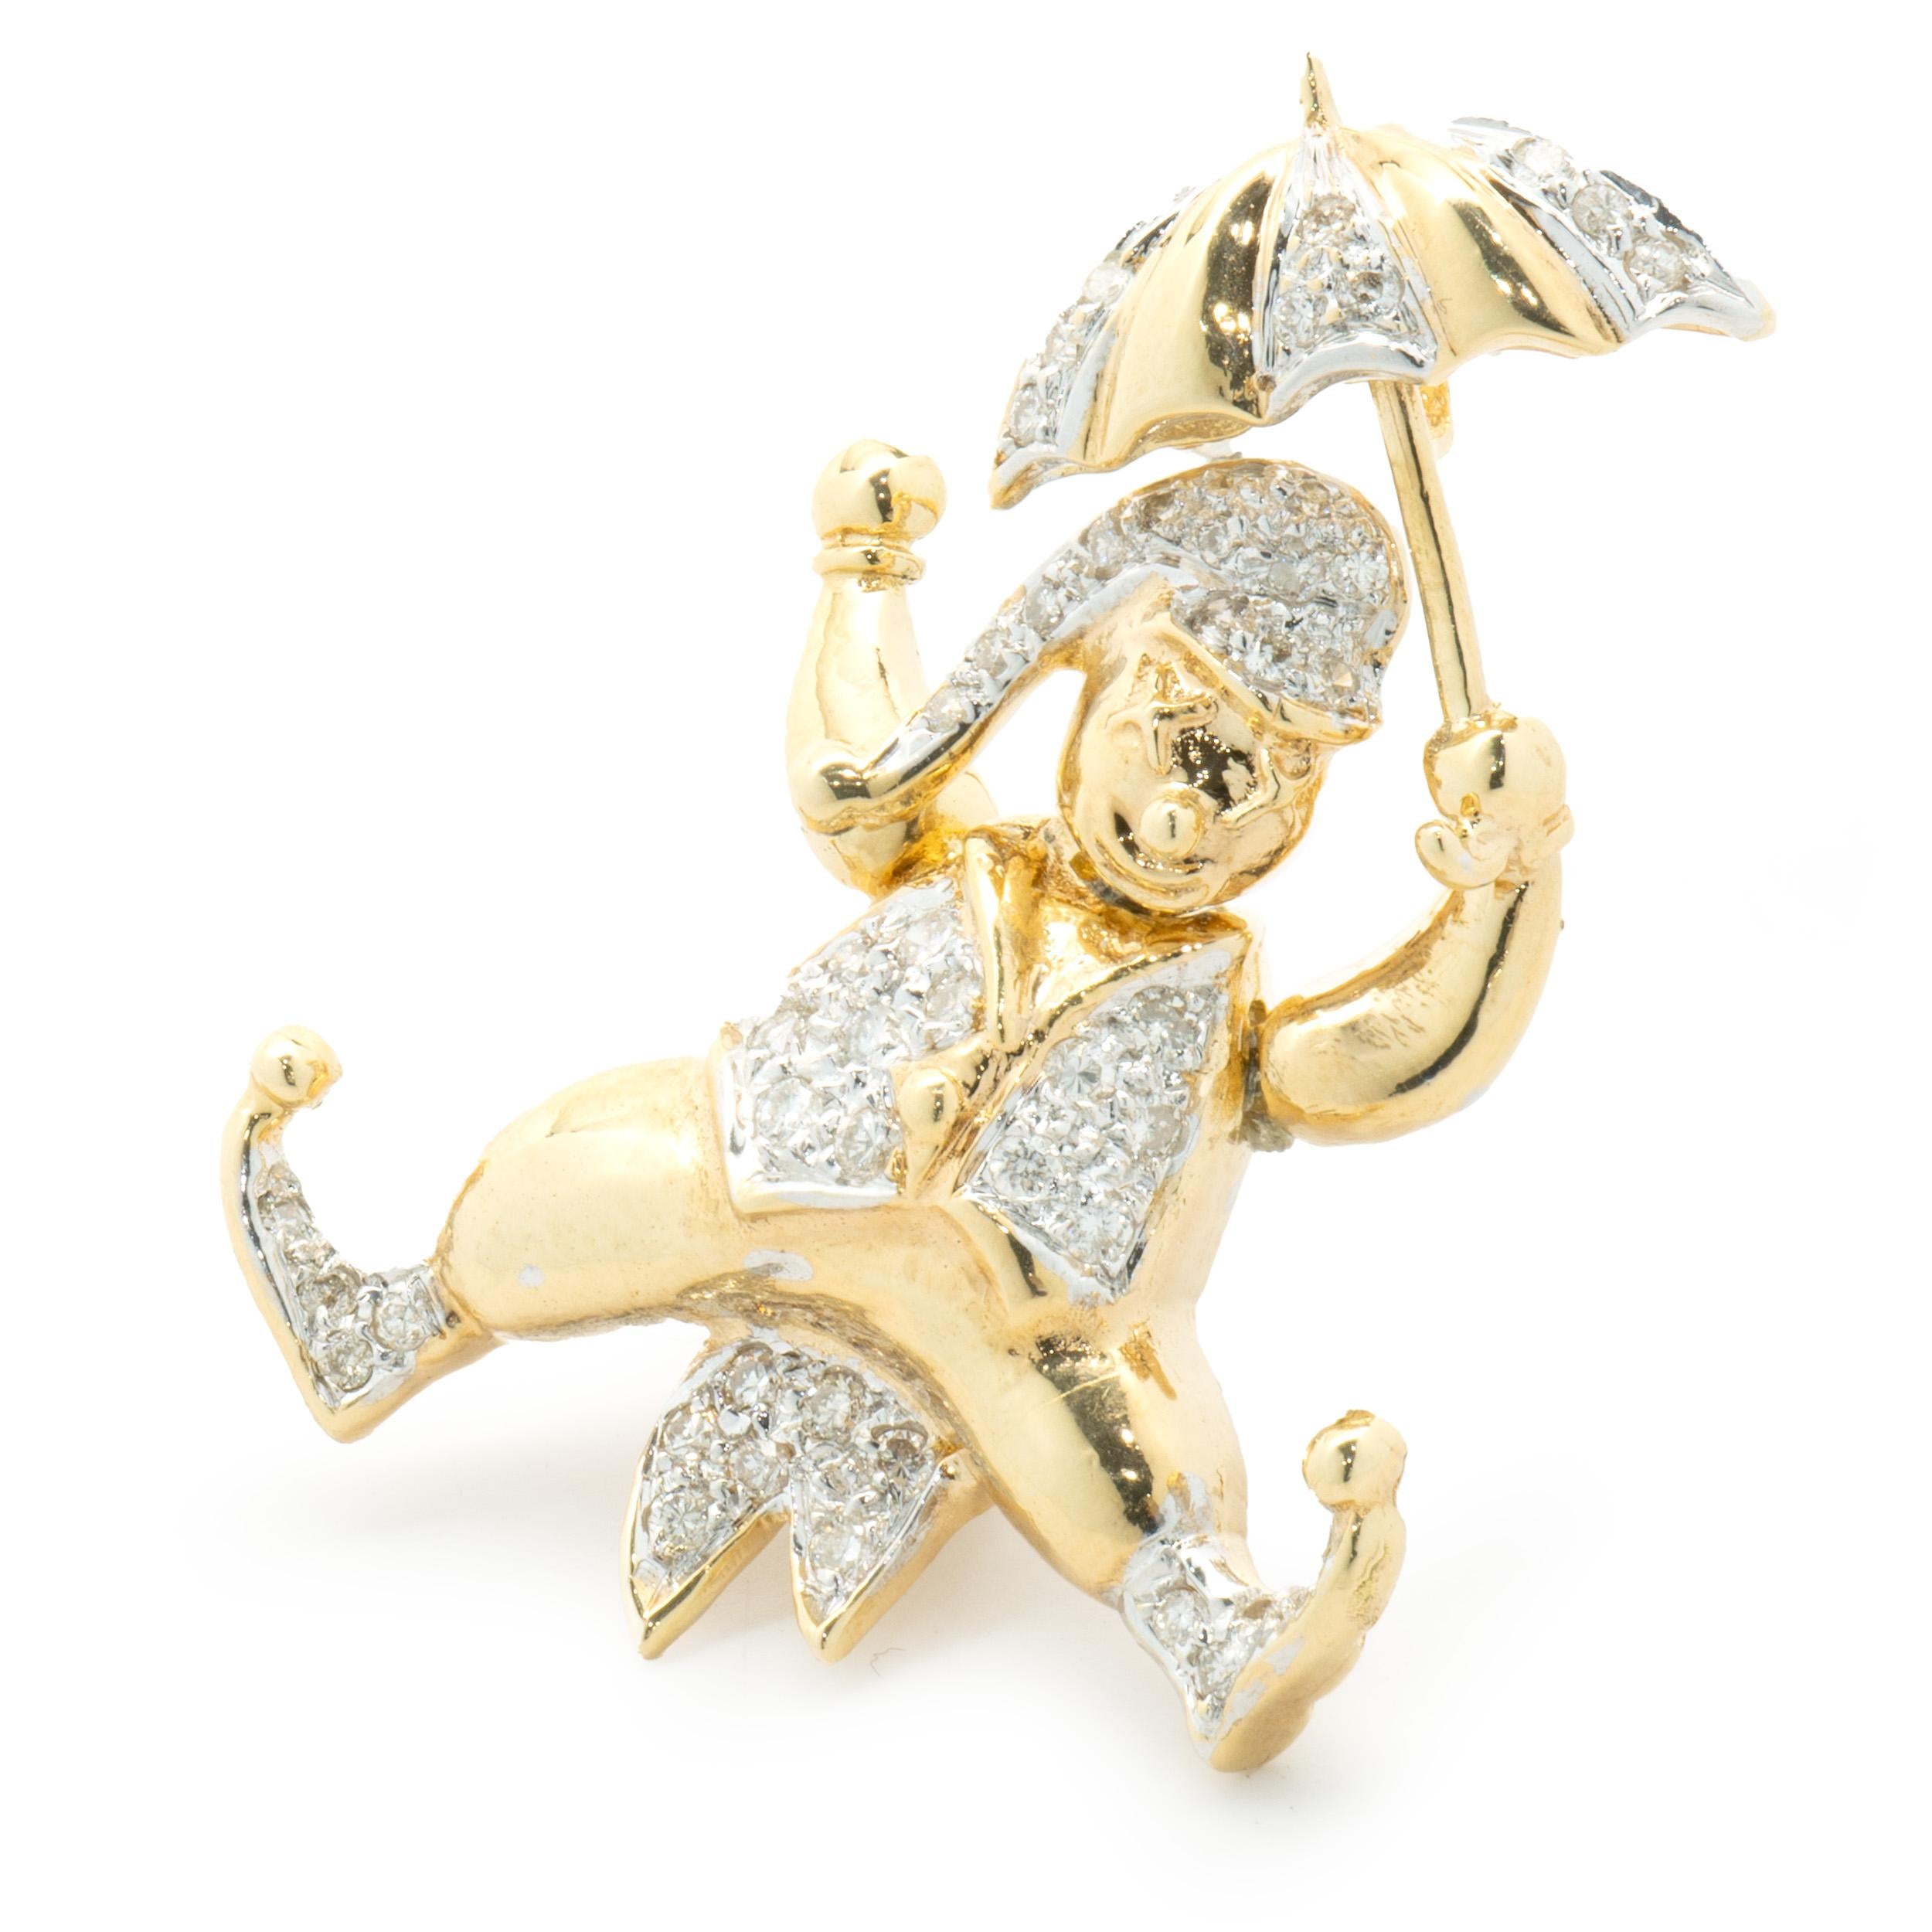 18 Karat Yellow Gold Pave Diamond Jester Pin In Excellent Condition For Sale In Scottsdale, AZ